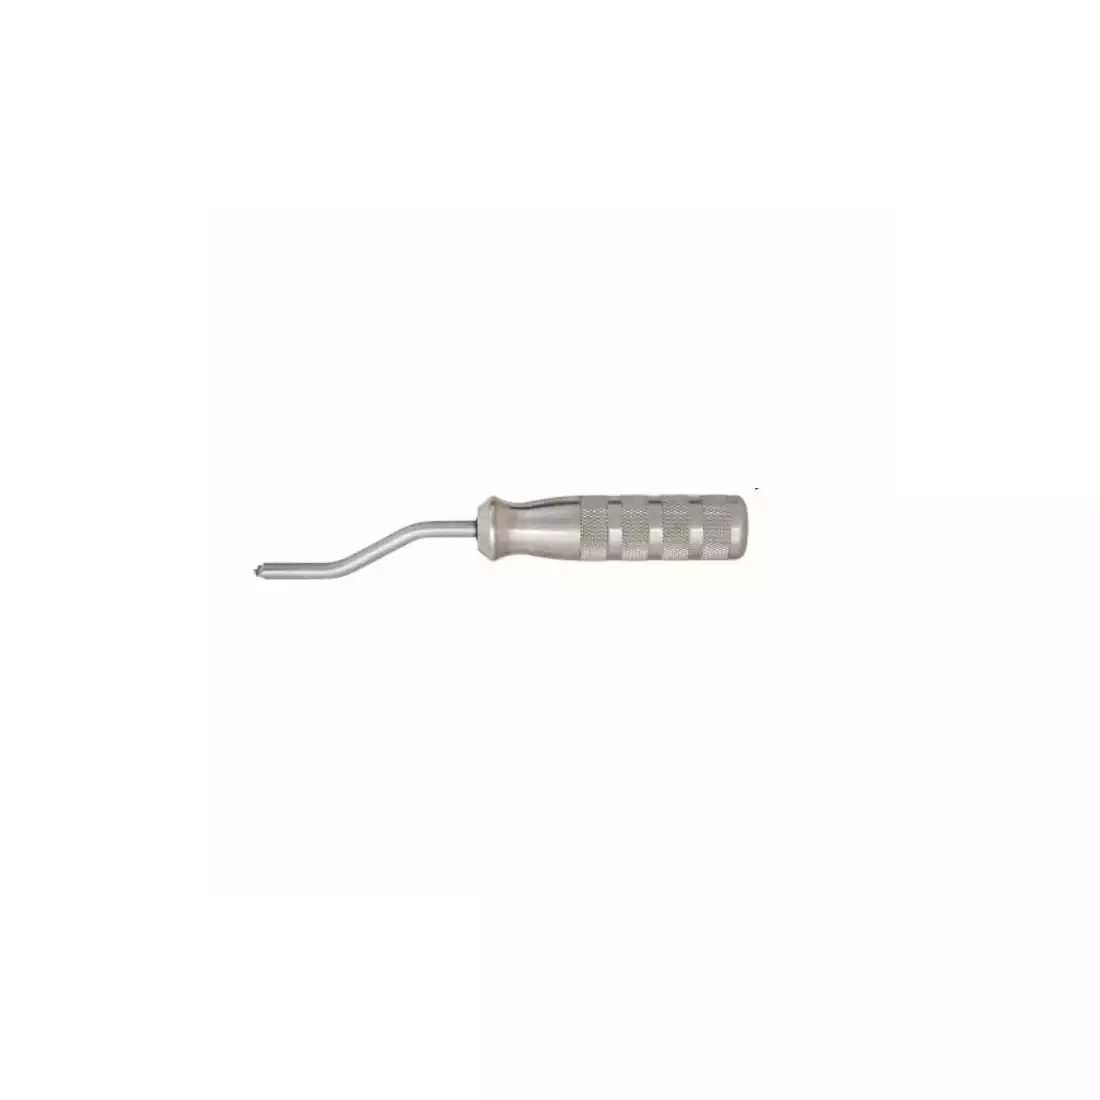 UNIOR key for quick assembly of nipples